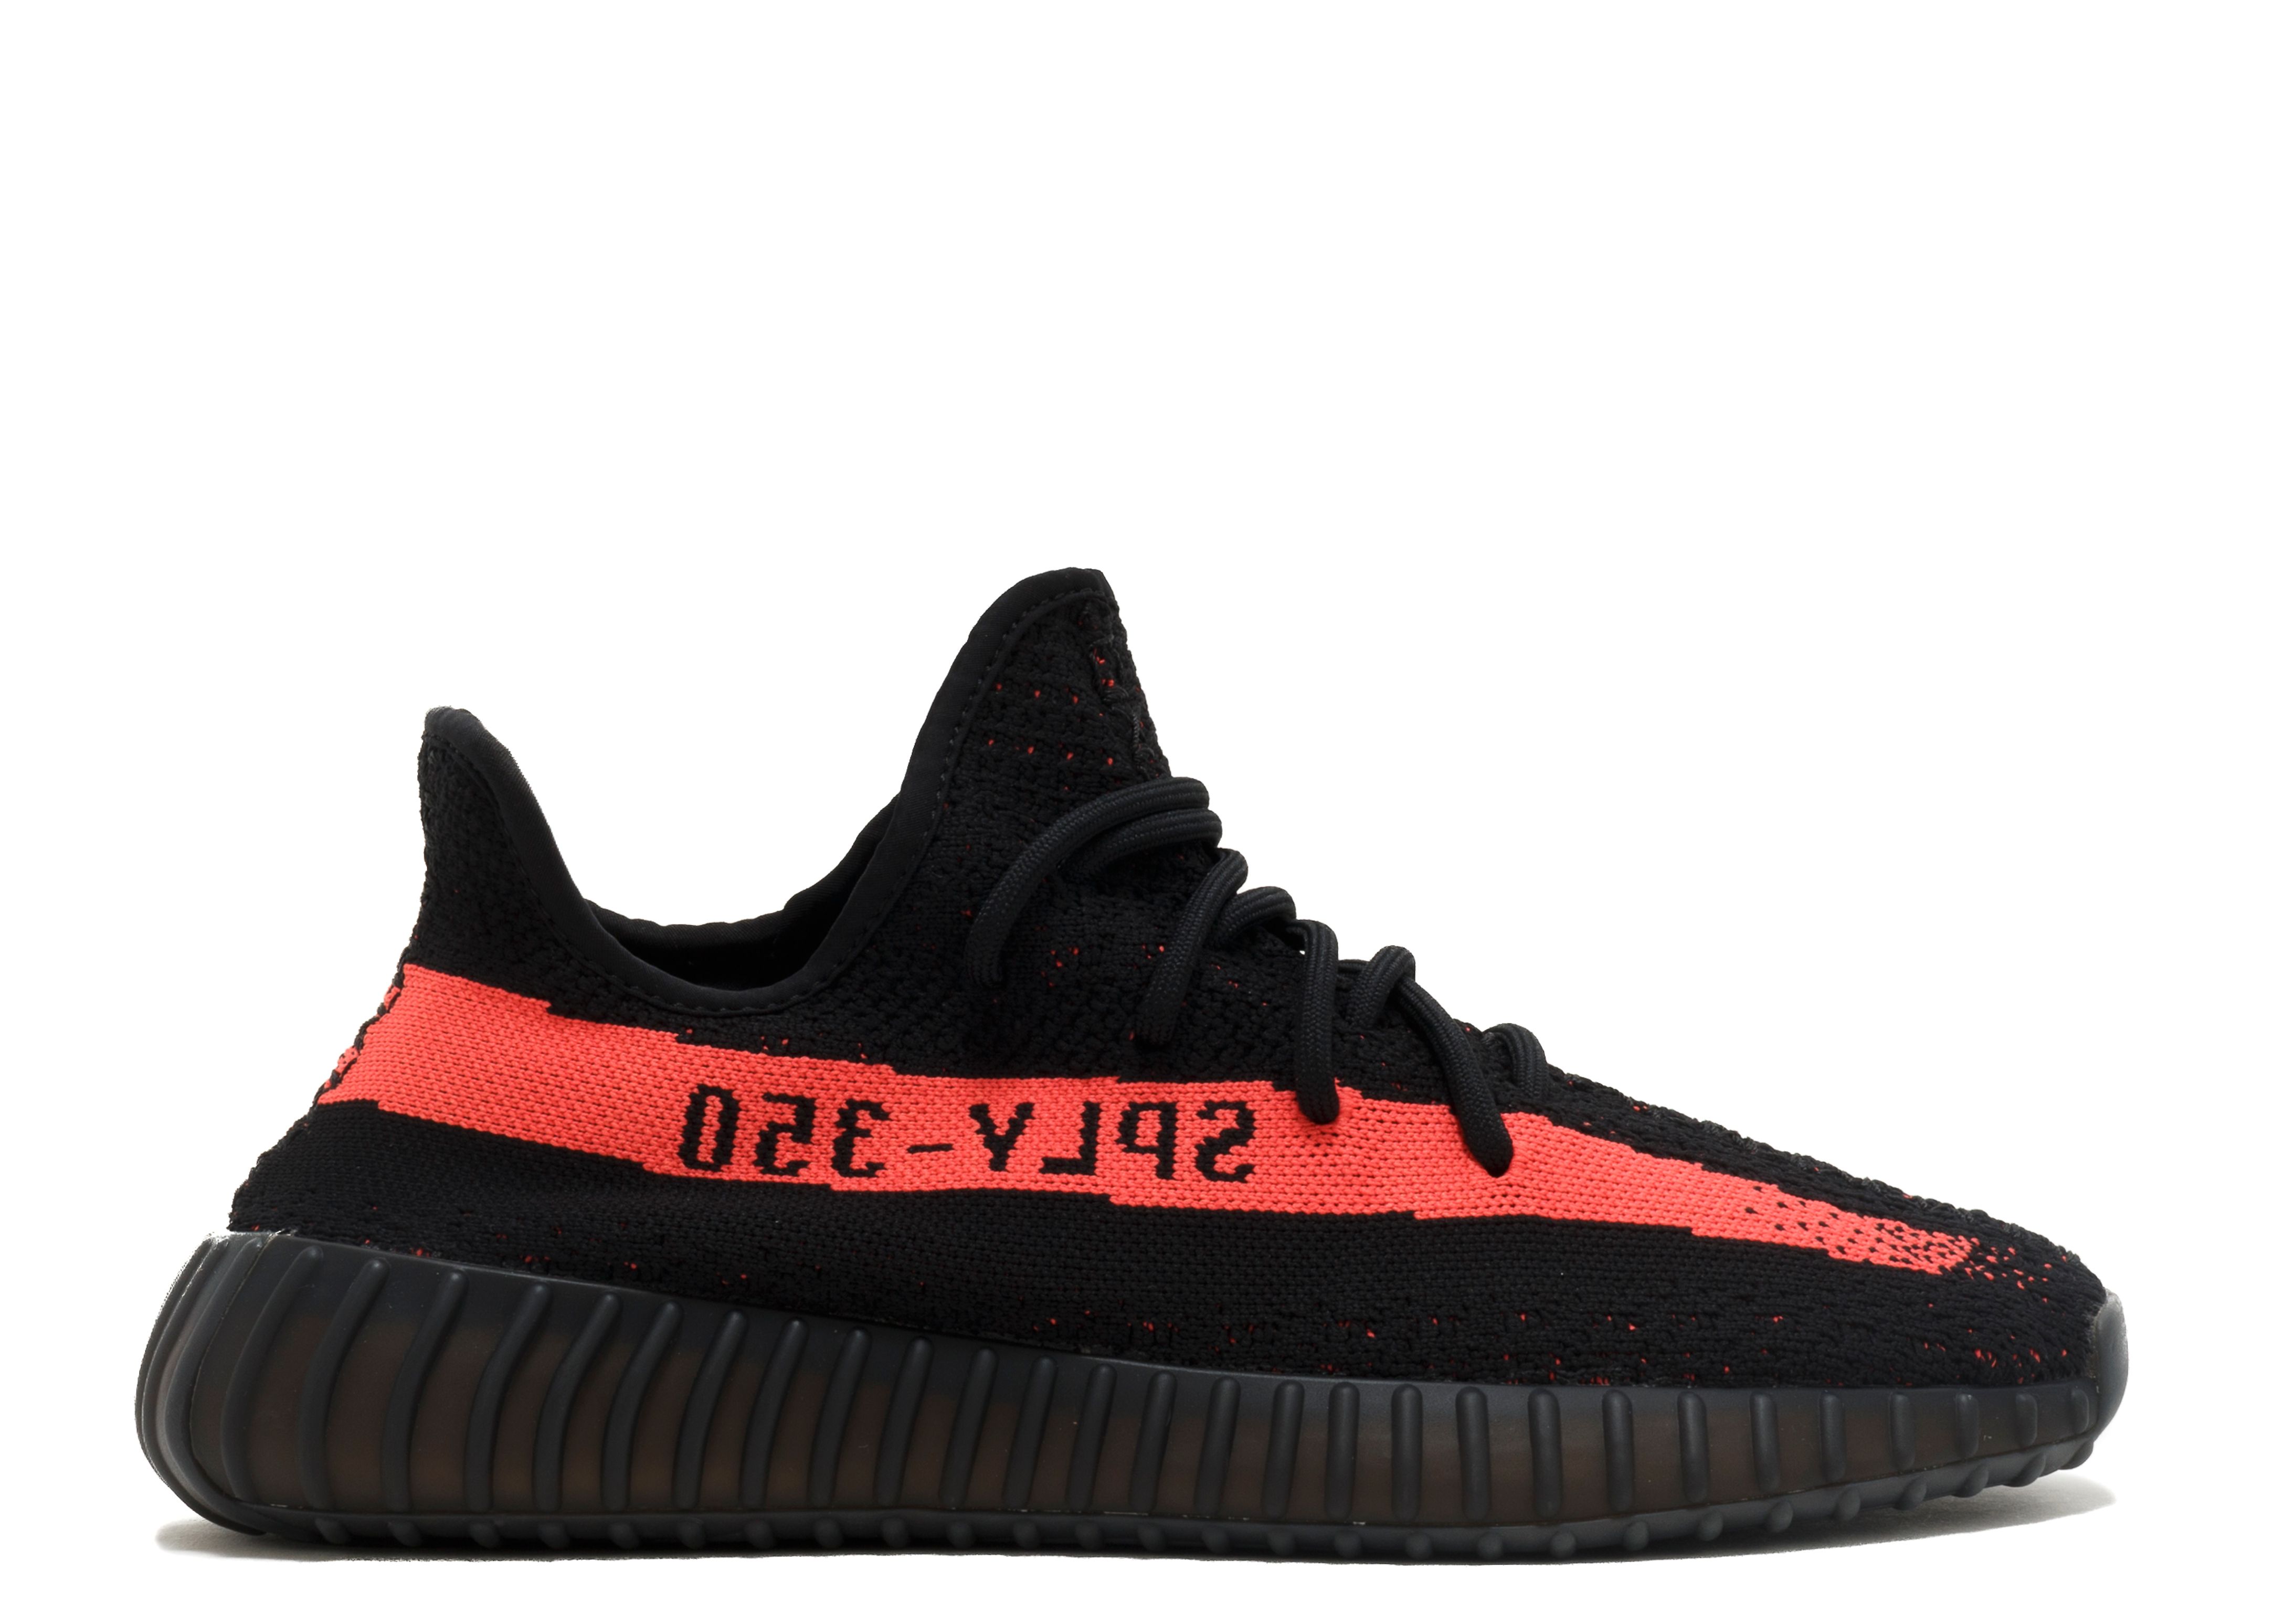 Adidas Yeezy Boost 350 v2 Core Black Green US 7 BY 9611 In Hand